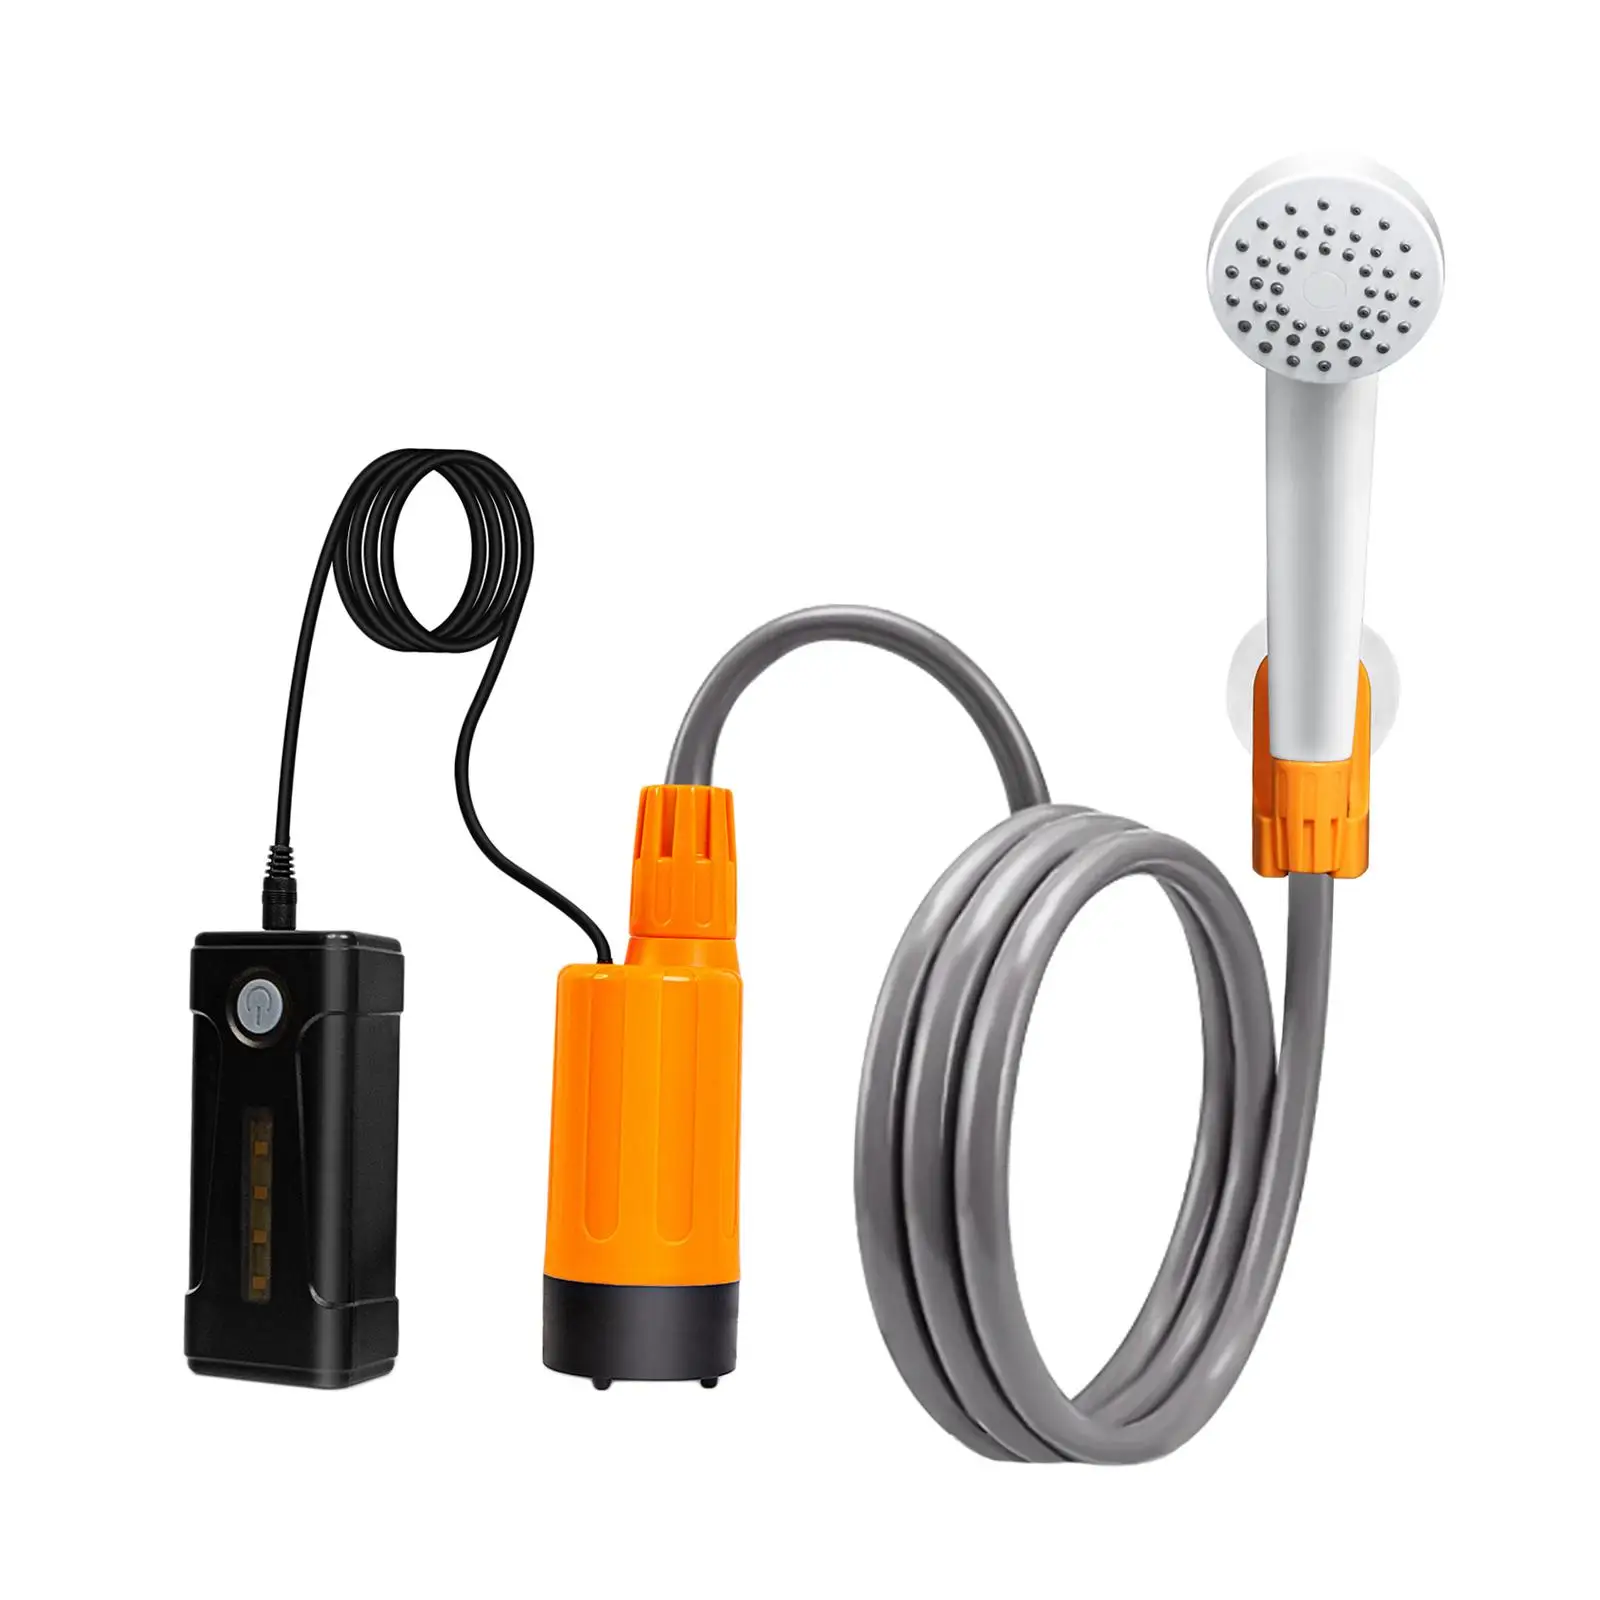 Portable Camping Shower Kit Compact USB Rechargeable Pet Grooming Handheld Camp Shower for Traveling Beach Van Tent